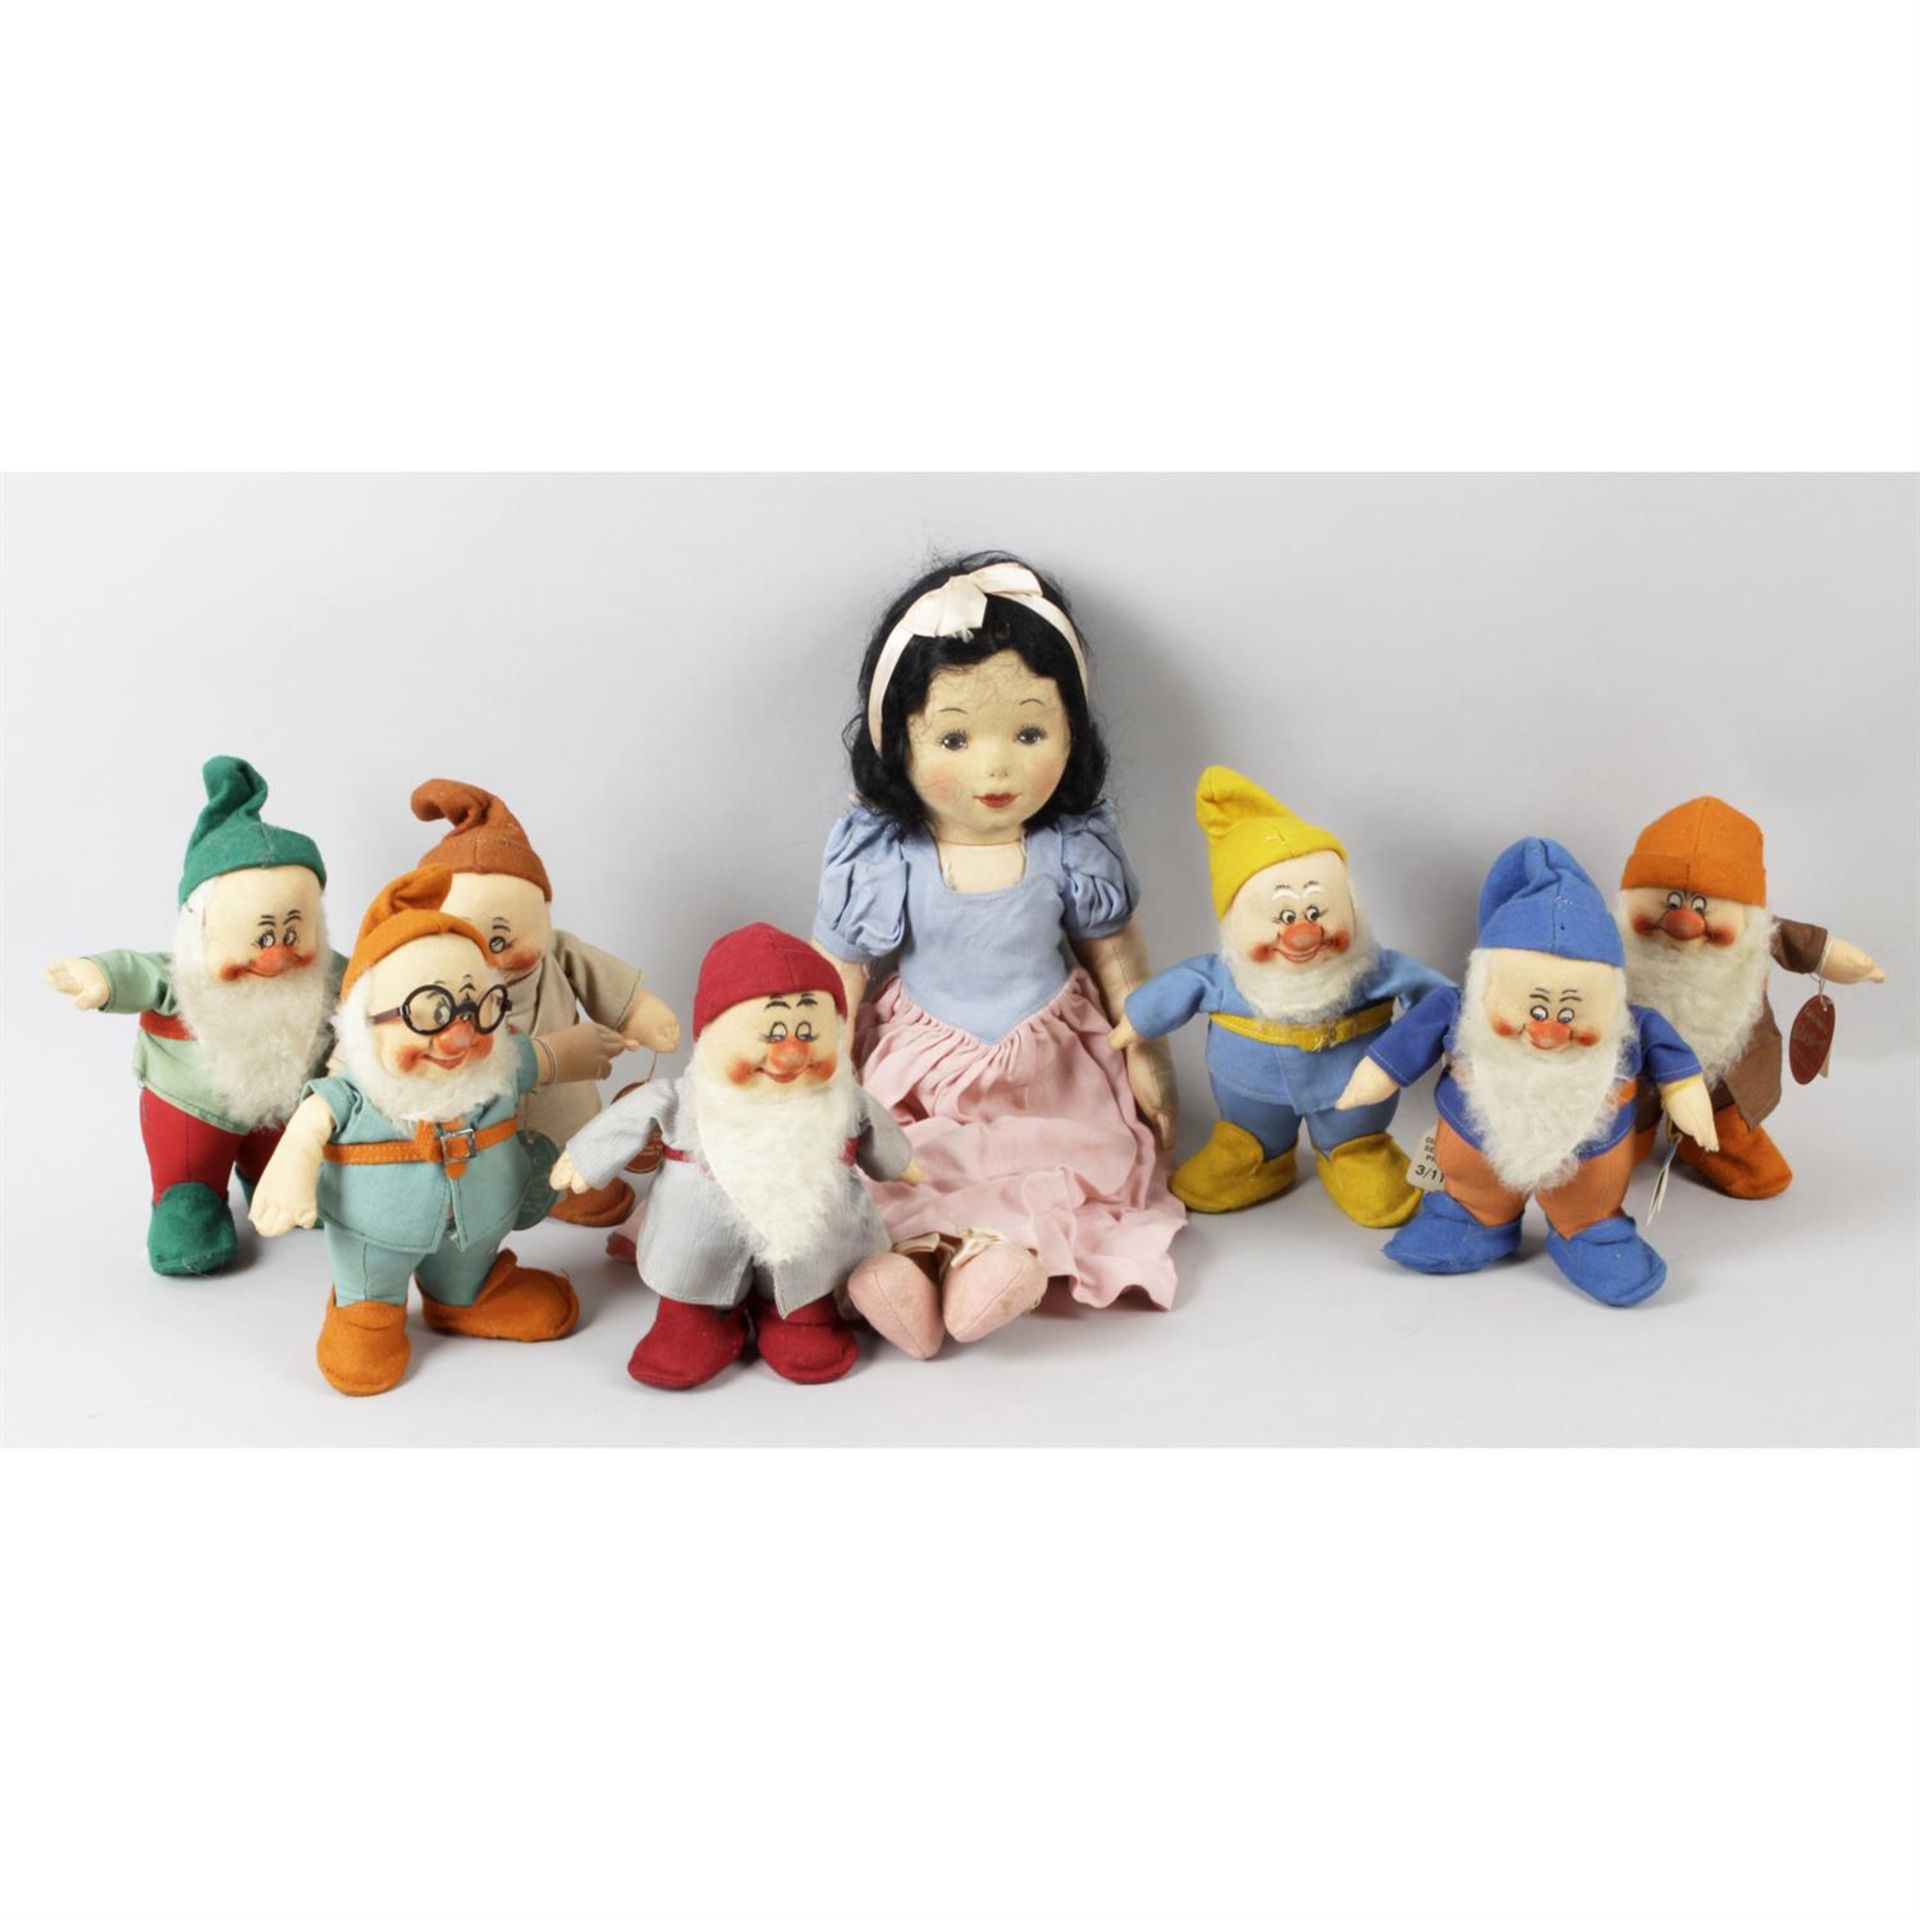 A Chad Valley doll modelled as Snow White, together with a set of seven dwarfs.